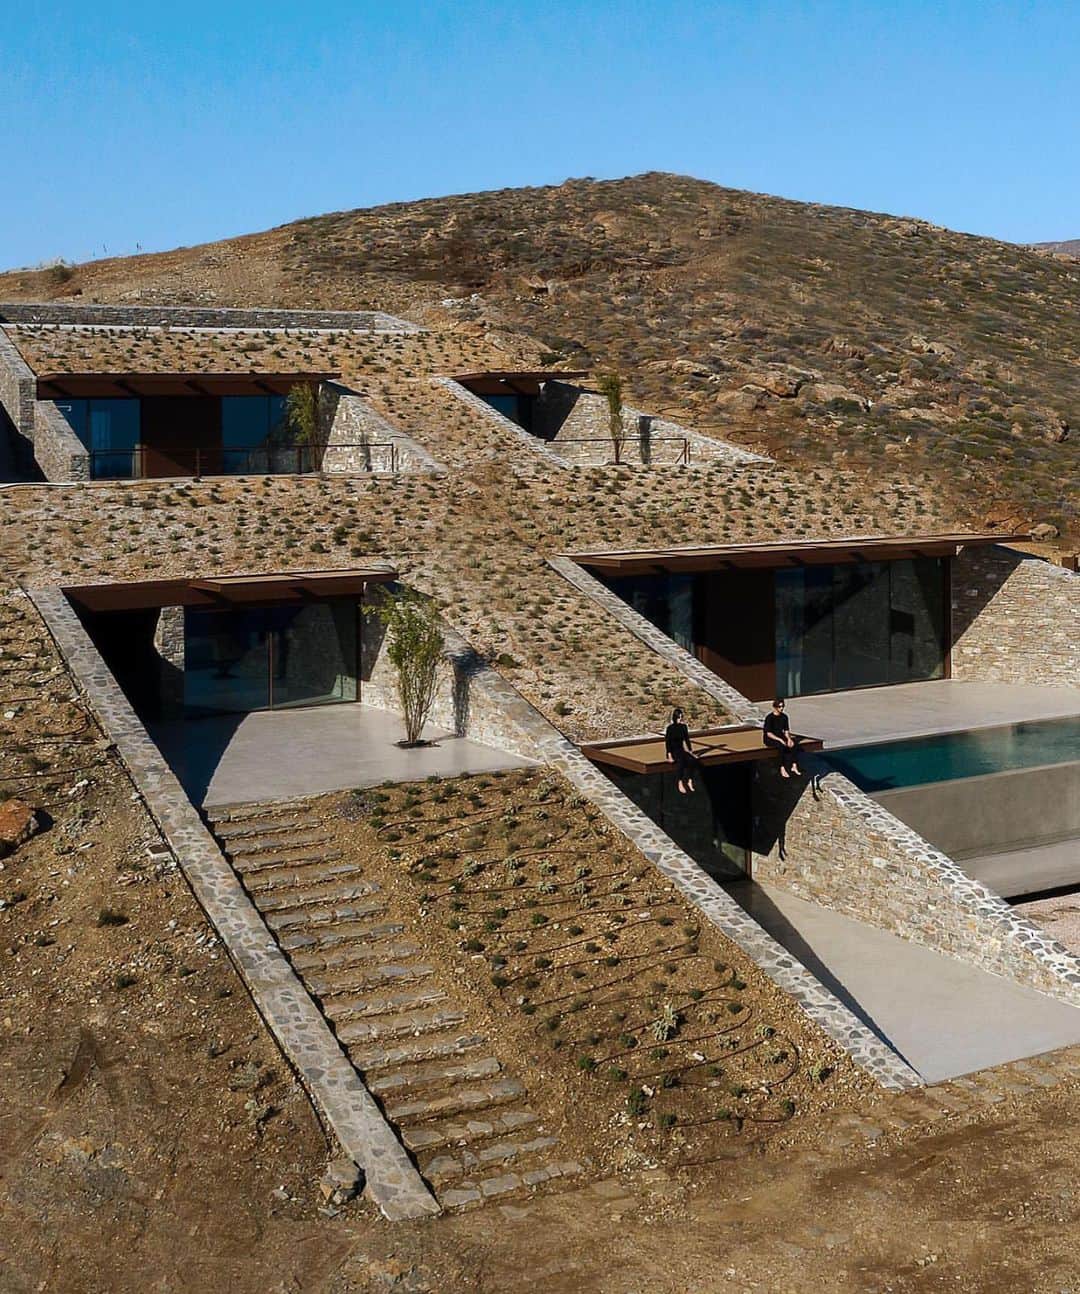 The Cool Hunterのインスタグラム：「Designed by Athens-based @moldarchitects nCAVED is currently high on our list of genuinely original yet refreshingly unpretentious vacation residences. The drama of the severe rocky landscape is repeated with dramatic skill in the chiselled strictness of the building.  Completed in 2020, nCAVED’s 340 square metres (3,660 sq.ft) of space disappear into the rock in a protected cove on the island of Serifos. From the outside it brings to mind the entrance of a pyramid or tomb. Yet from the inside, the living rooms are filled with natural light and afford spectacular views of the Aegean Sea. The strong northerly winds of the sea were one of the key considerations in the planning process that resulted in a dramatic solution providing both extreme shelter and stunning views. (Link in profile) #swipeleft」